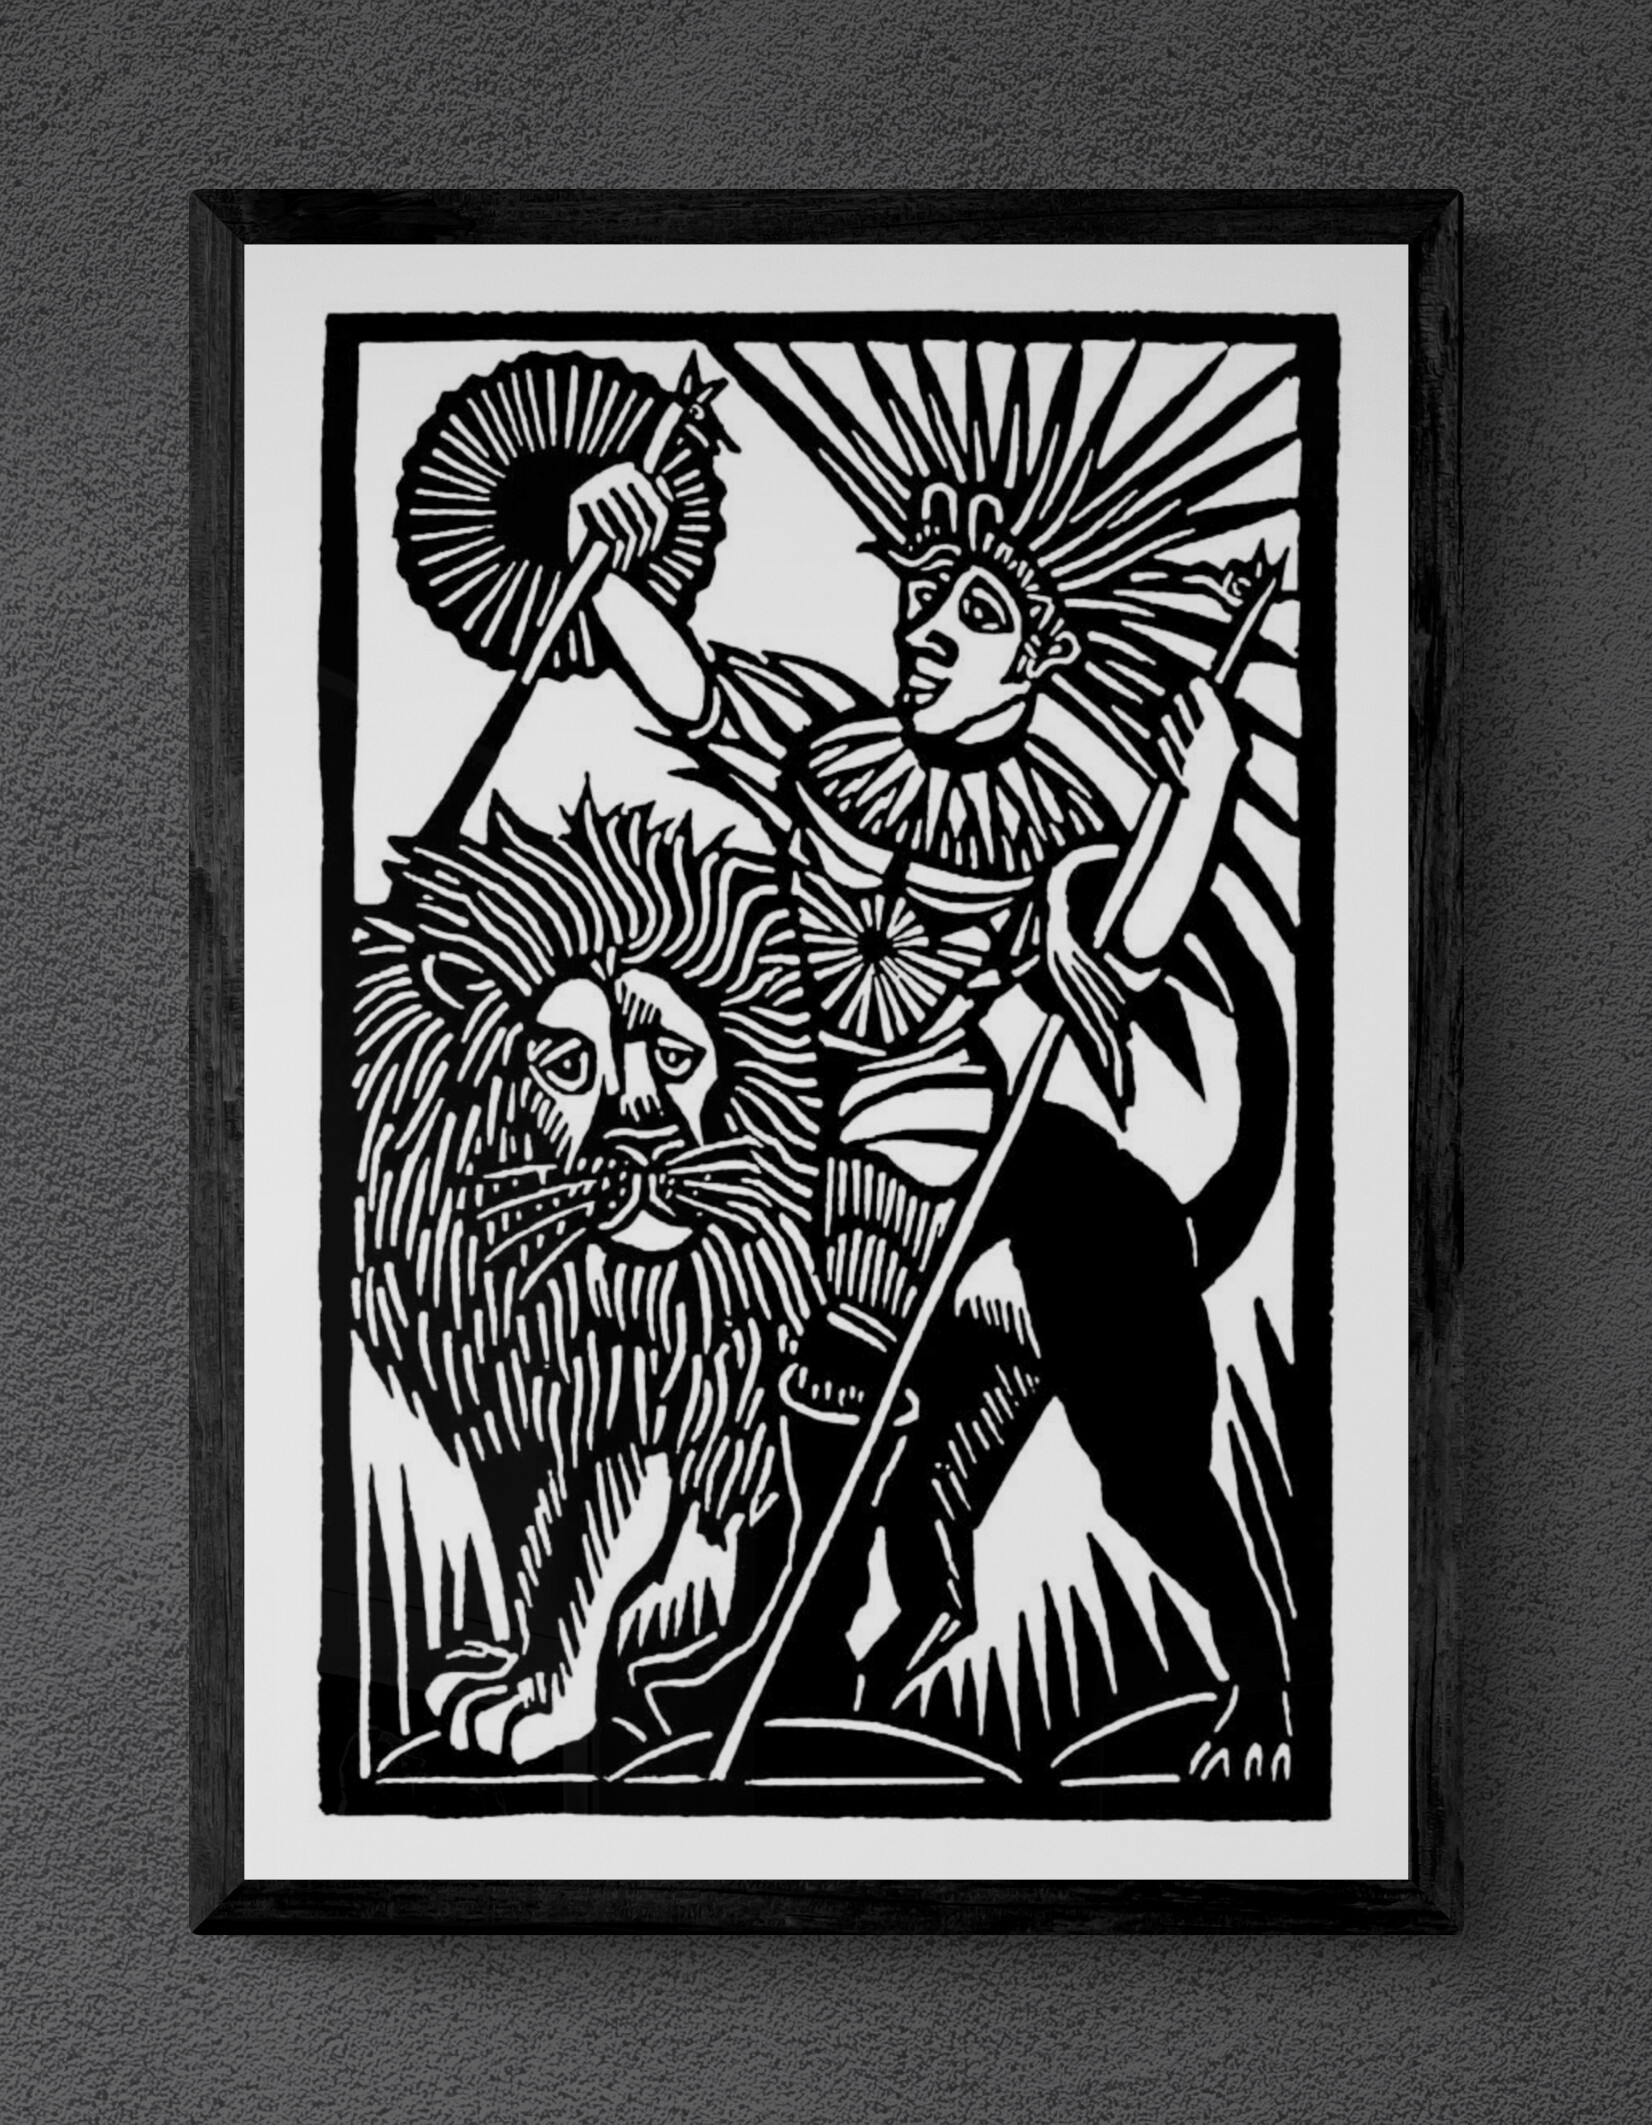 Prince of Wands - The Light and Shadow Tarot